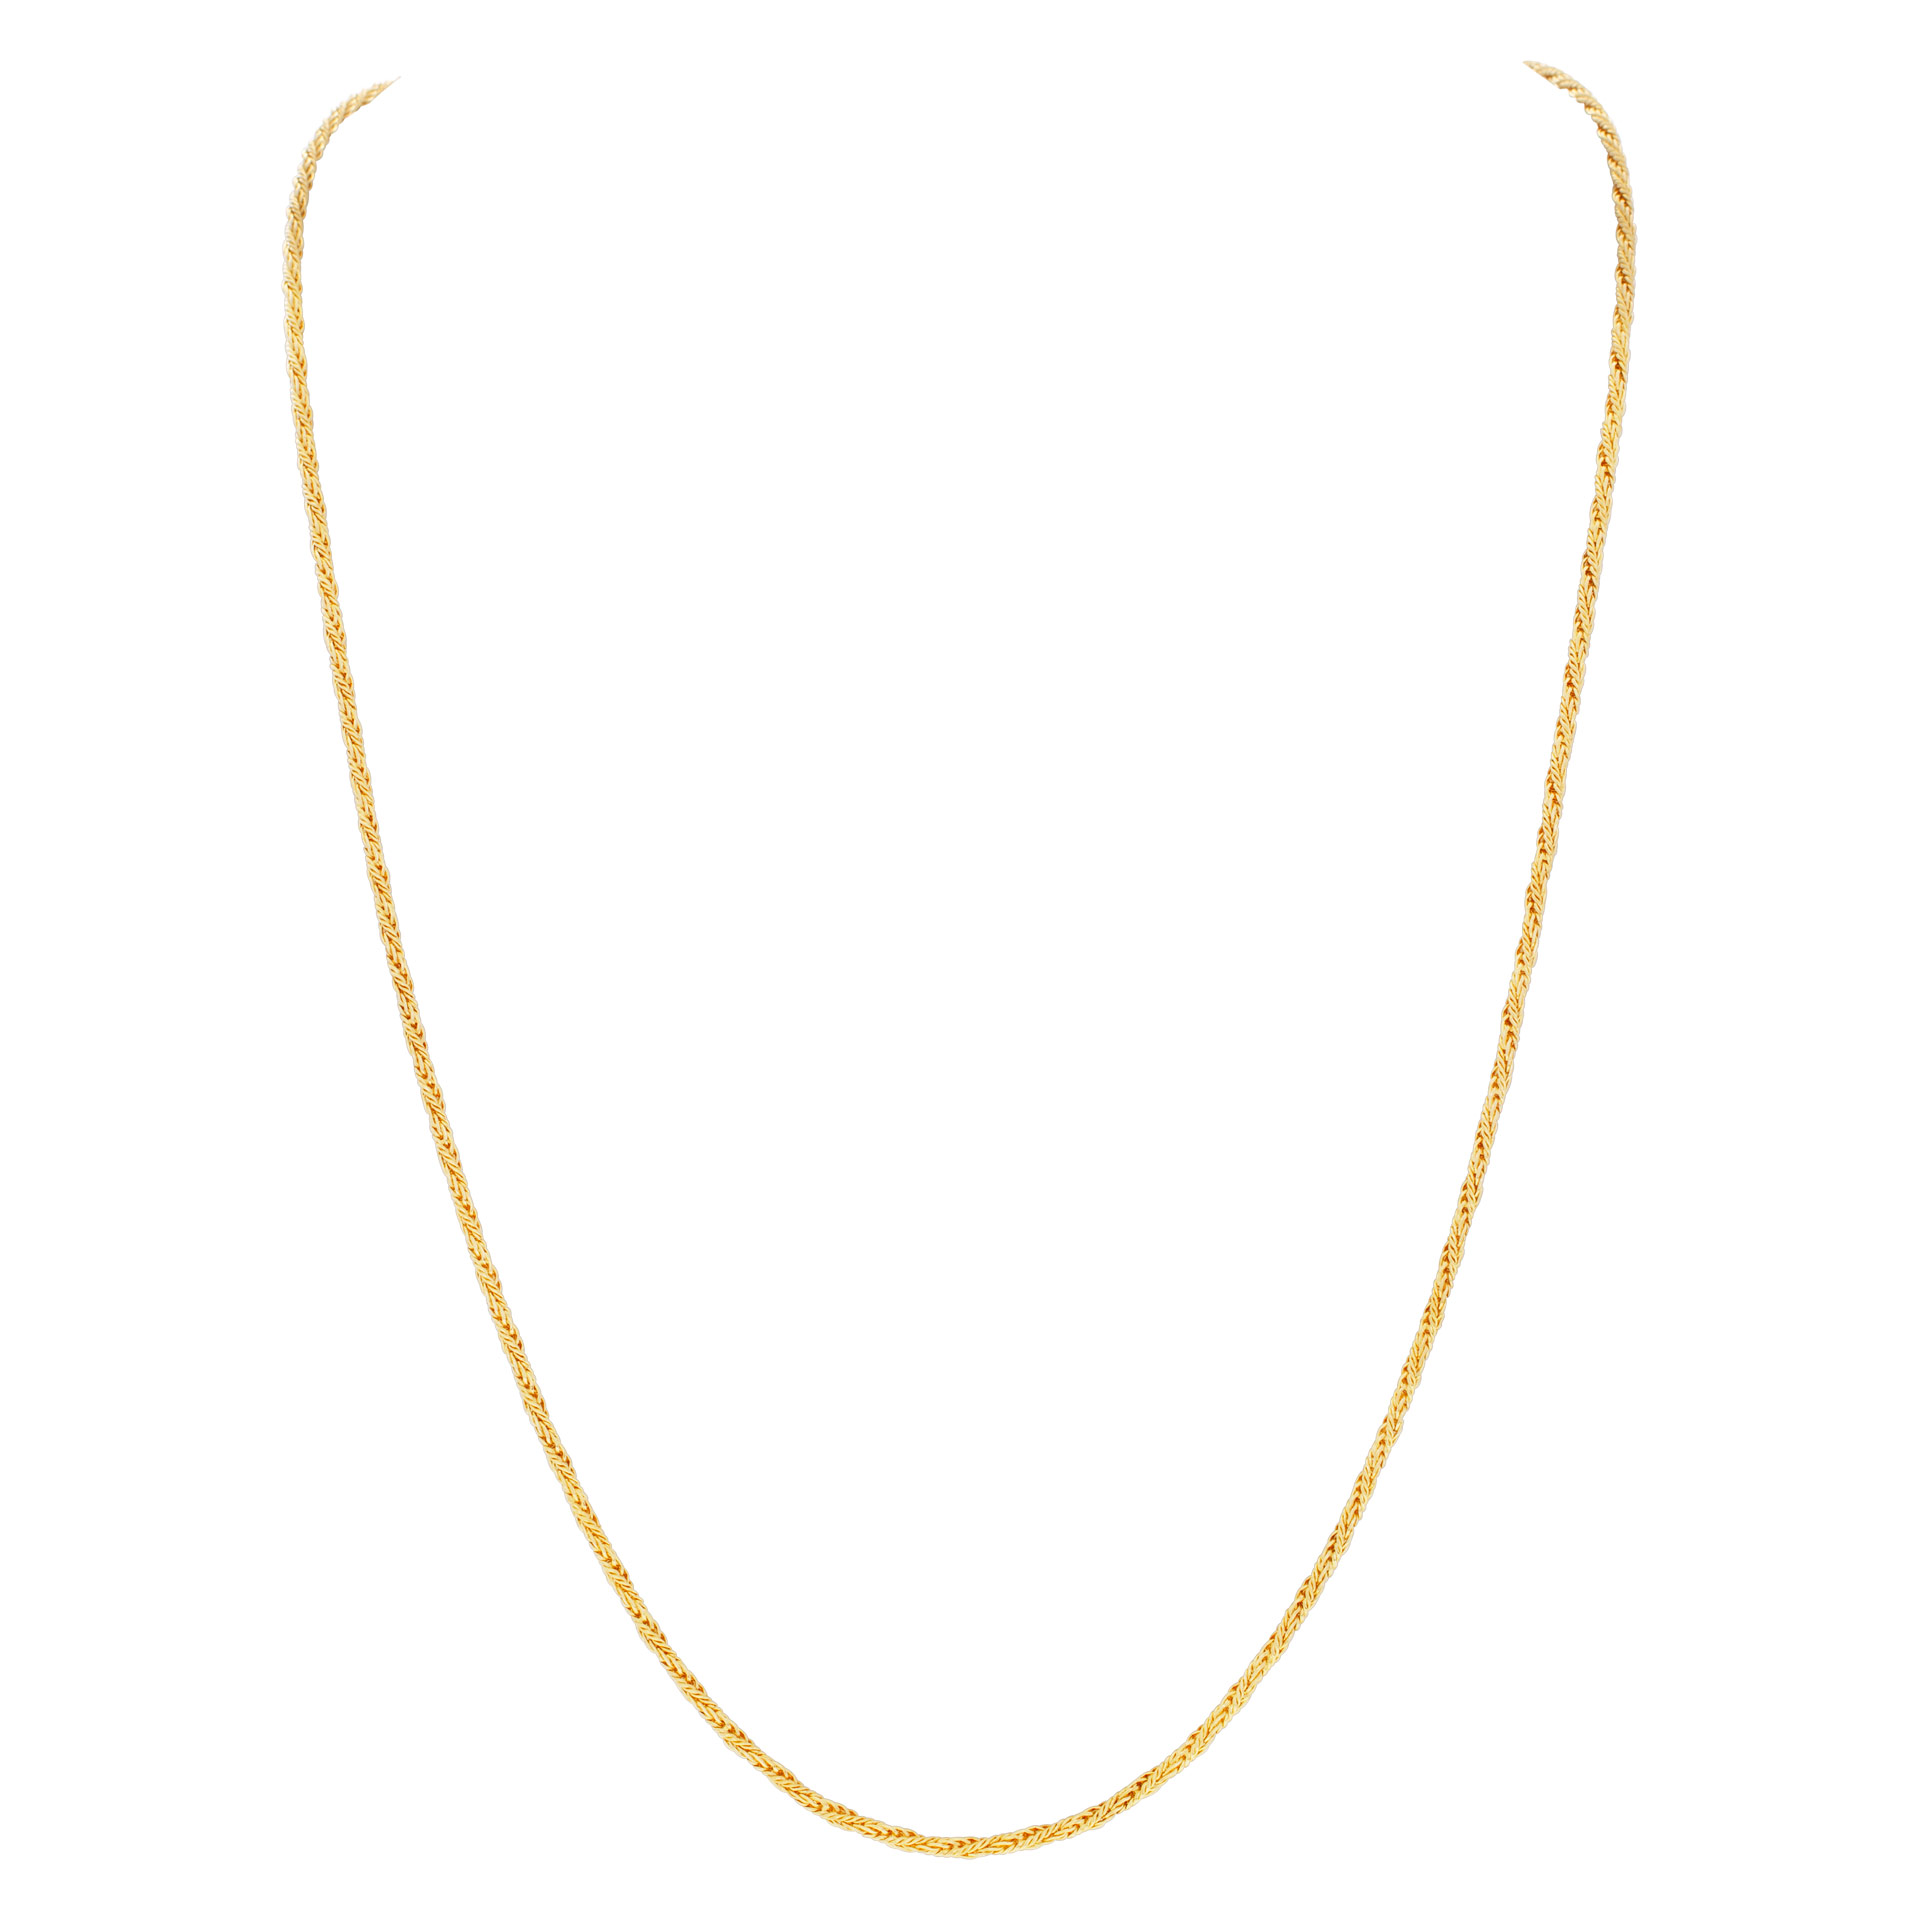 Rope style necklace in 18k yellow gold image 1